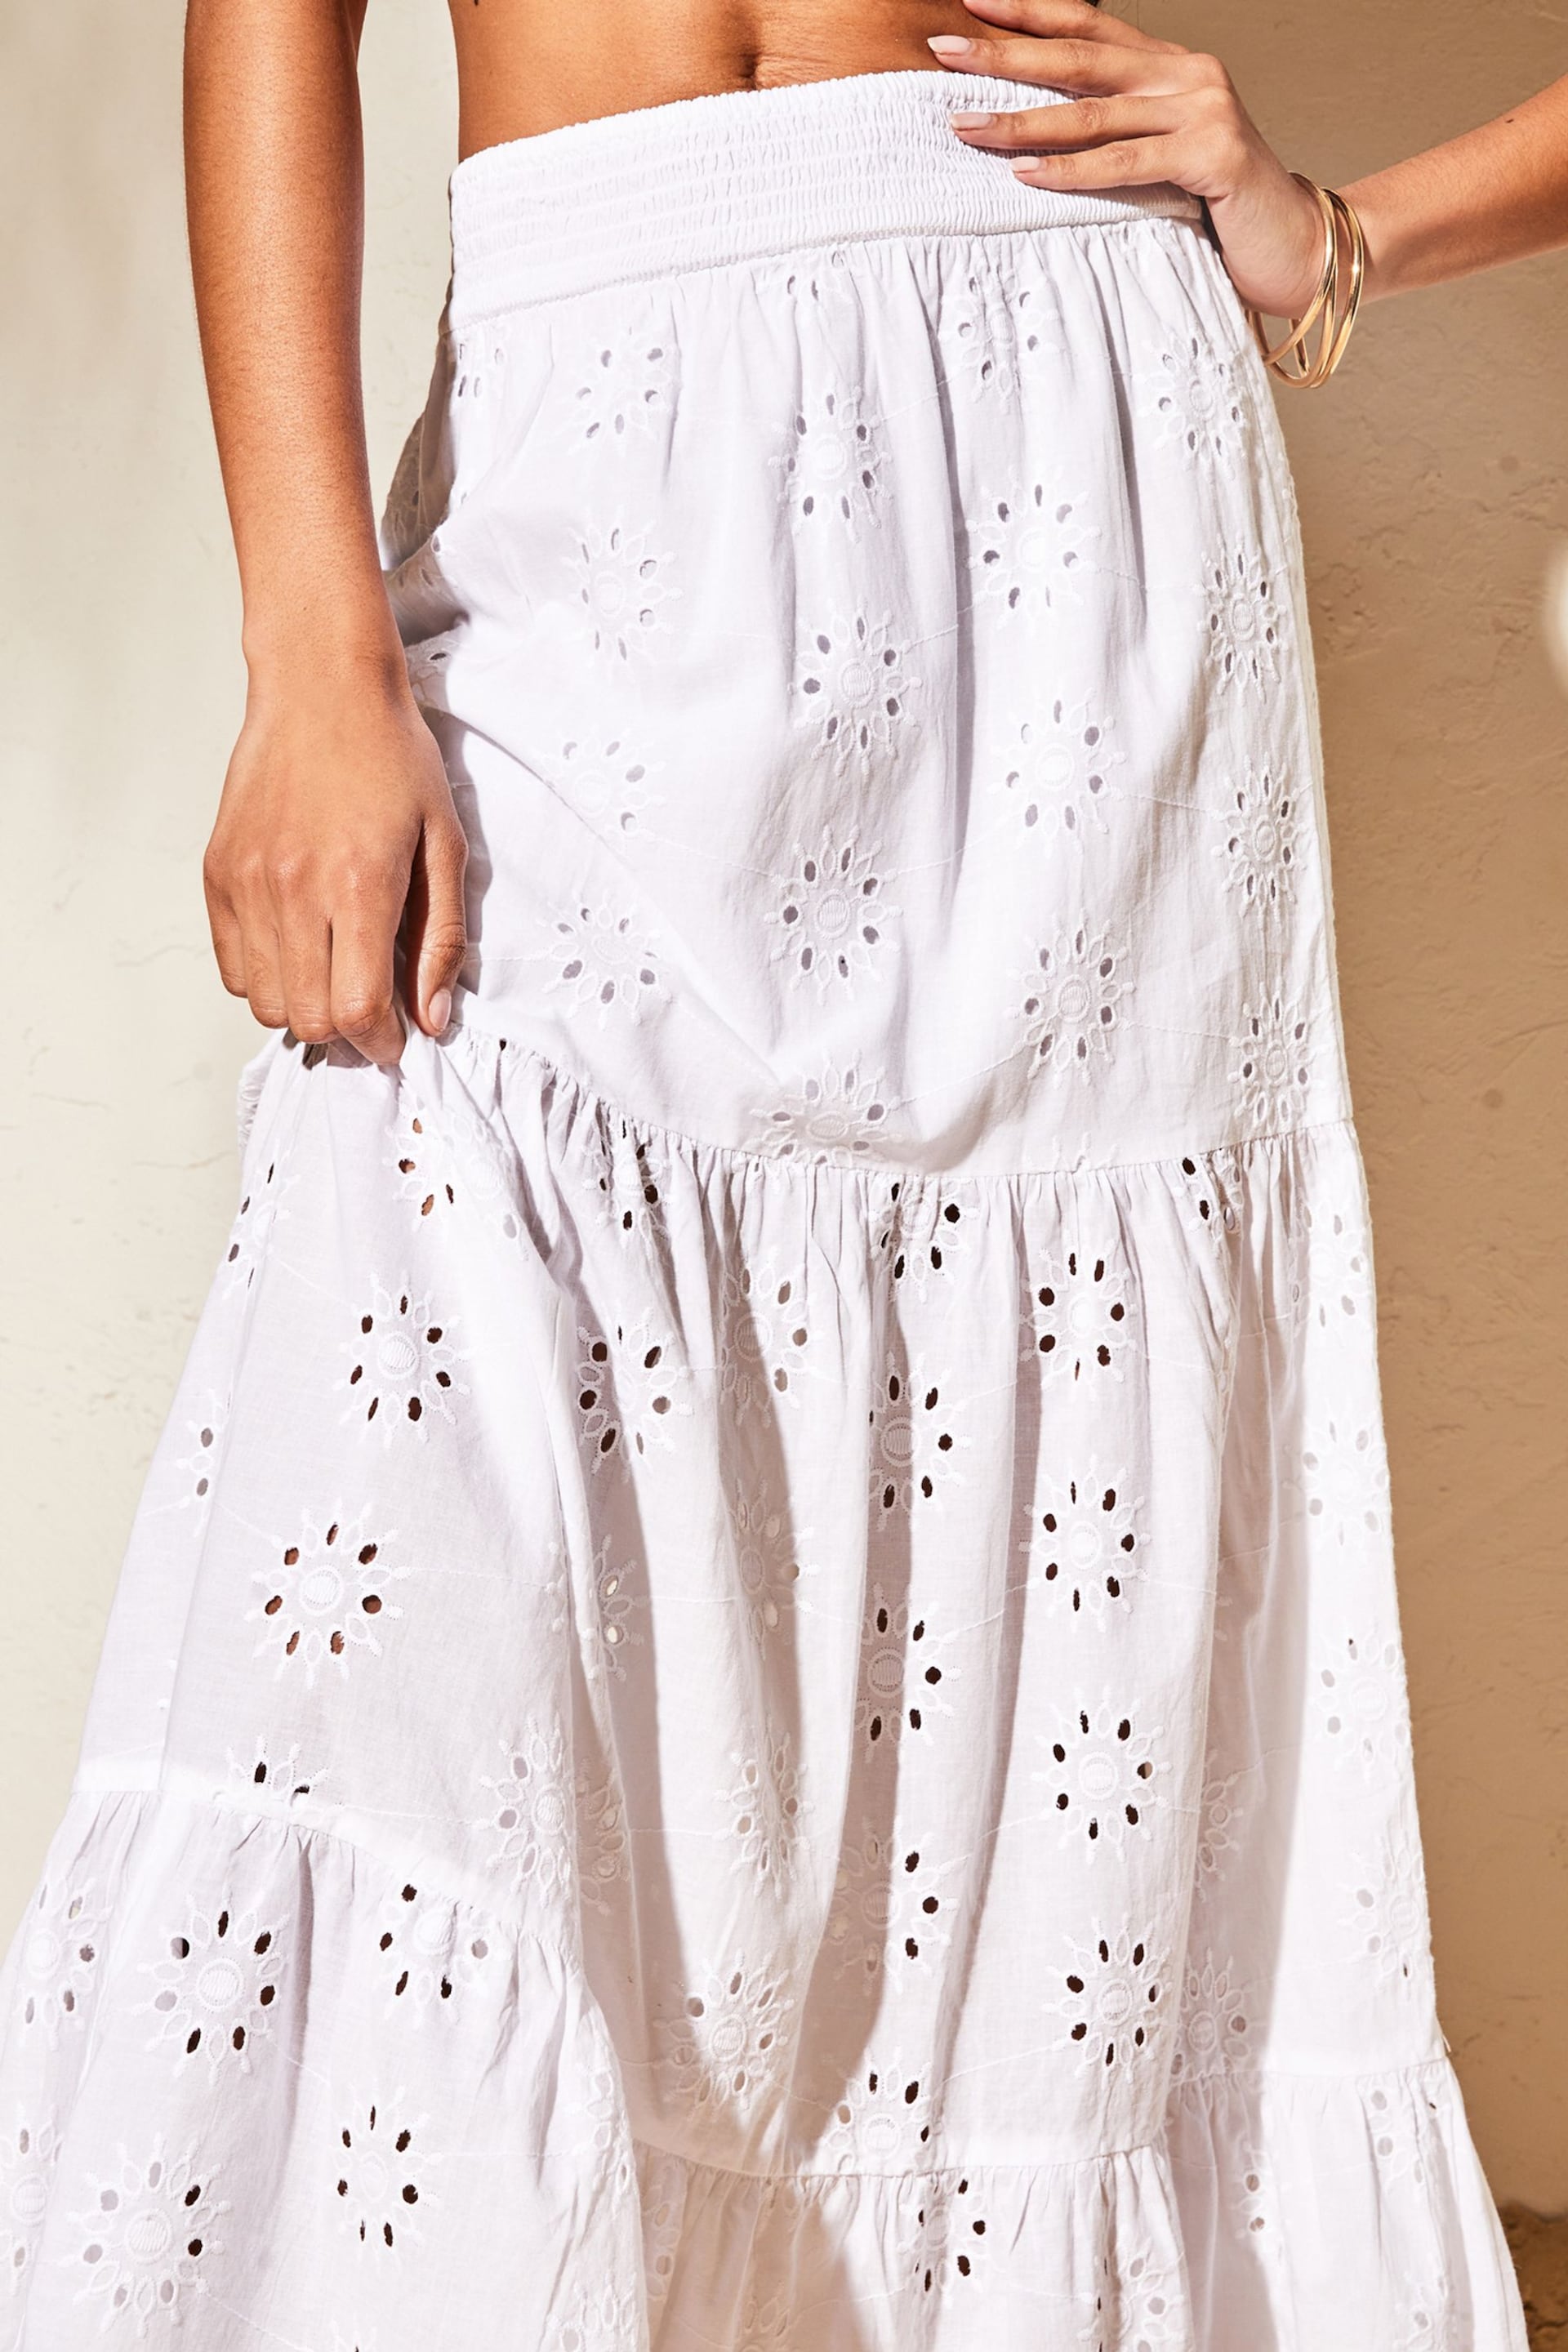 Lipsy White Broderie Tiered Maxi Skirt - Image 4 of 4